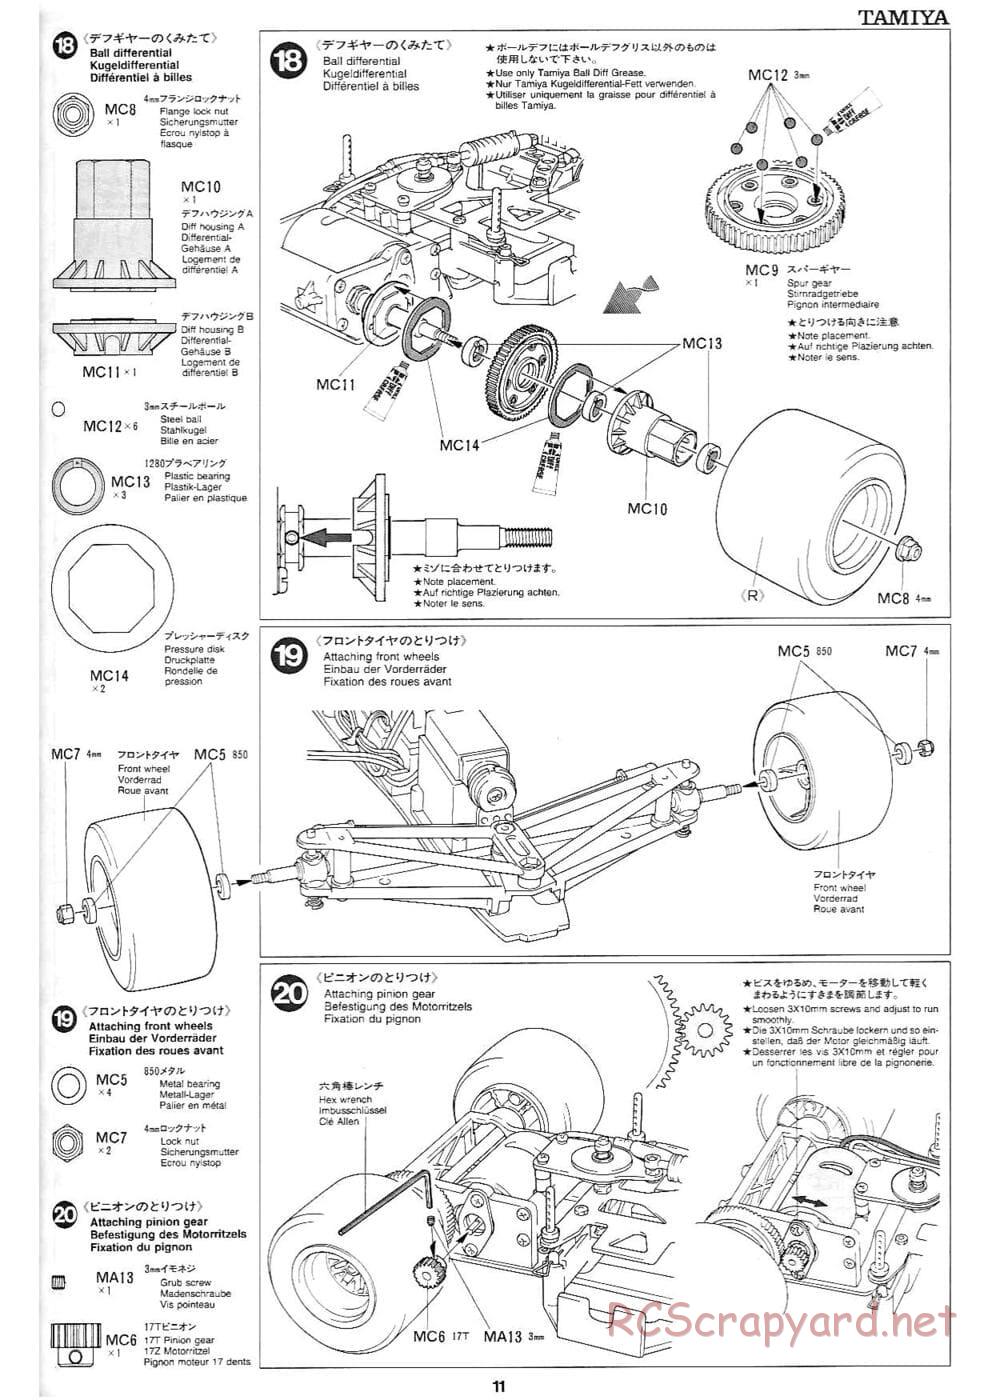 Tamiya - Toyota GT-One TS020 - F103RS Chassis - Manual - Page 11